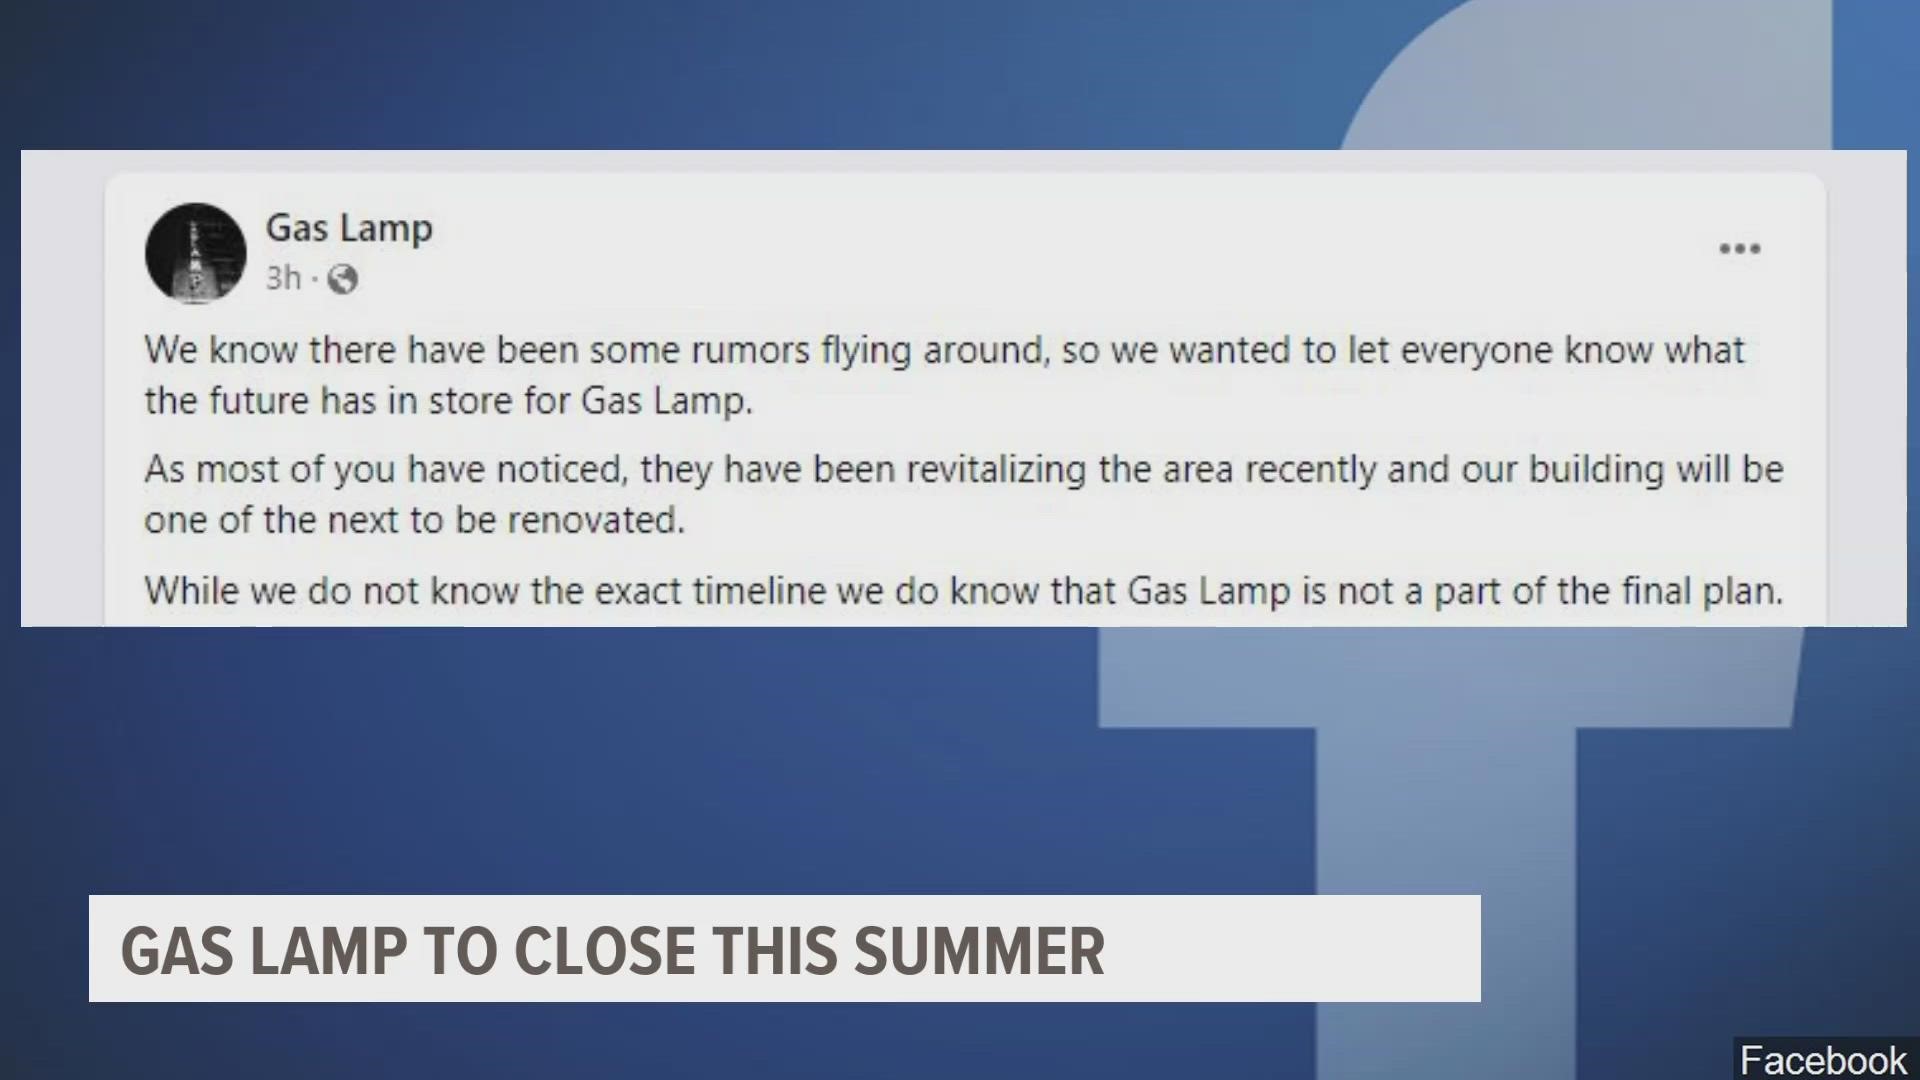 Gas Lamp shared a message on its Facebook Monday confirming that it would "be closing our doors for the last time on July 9th, 2023."